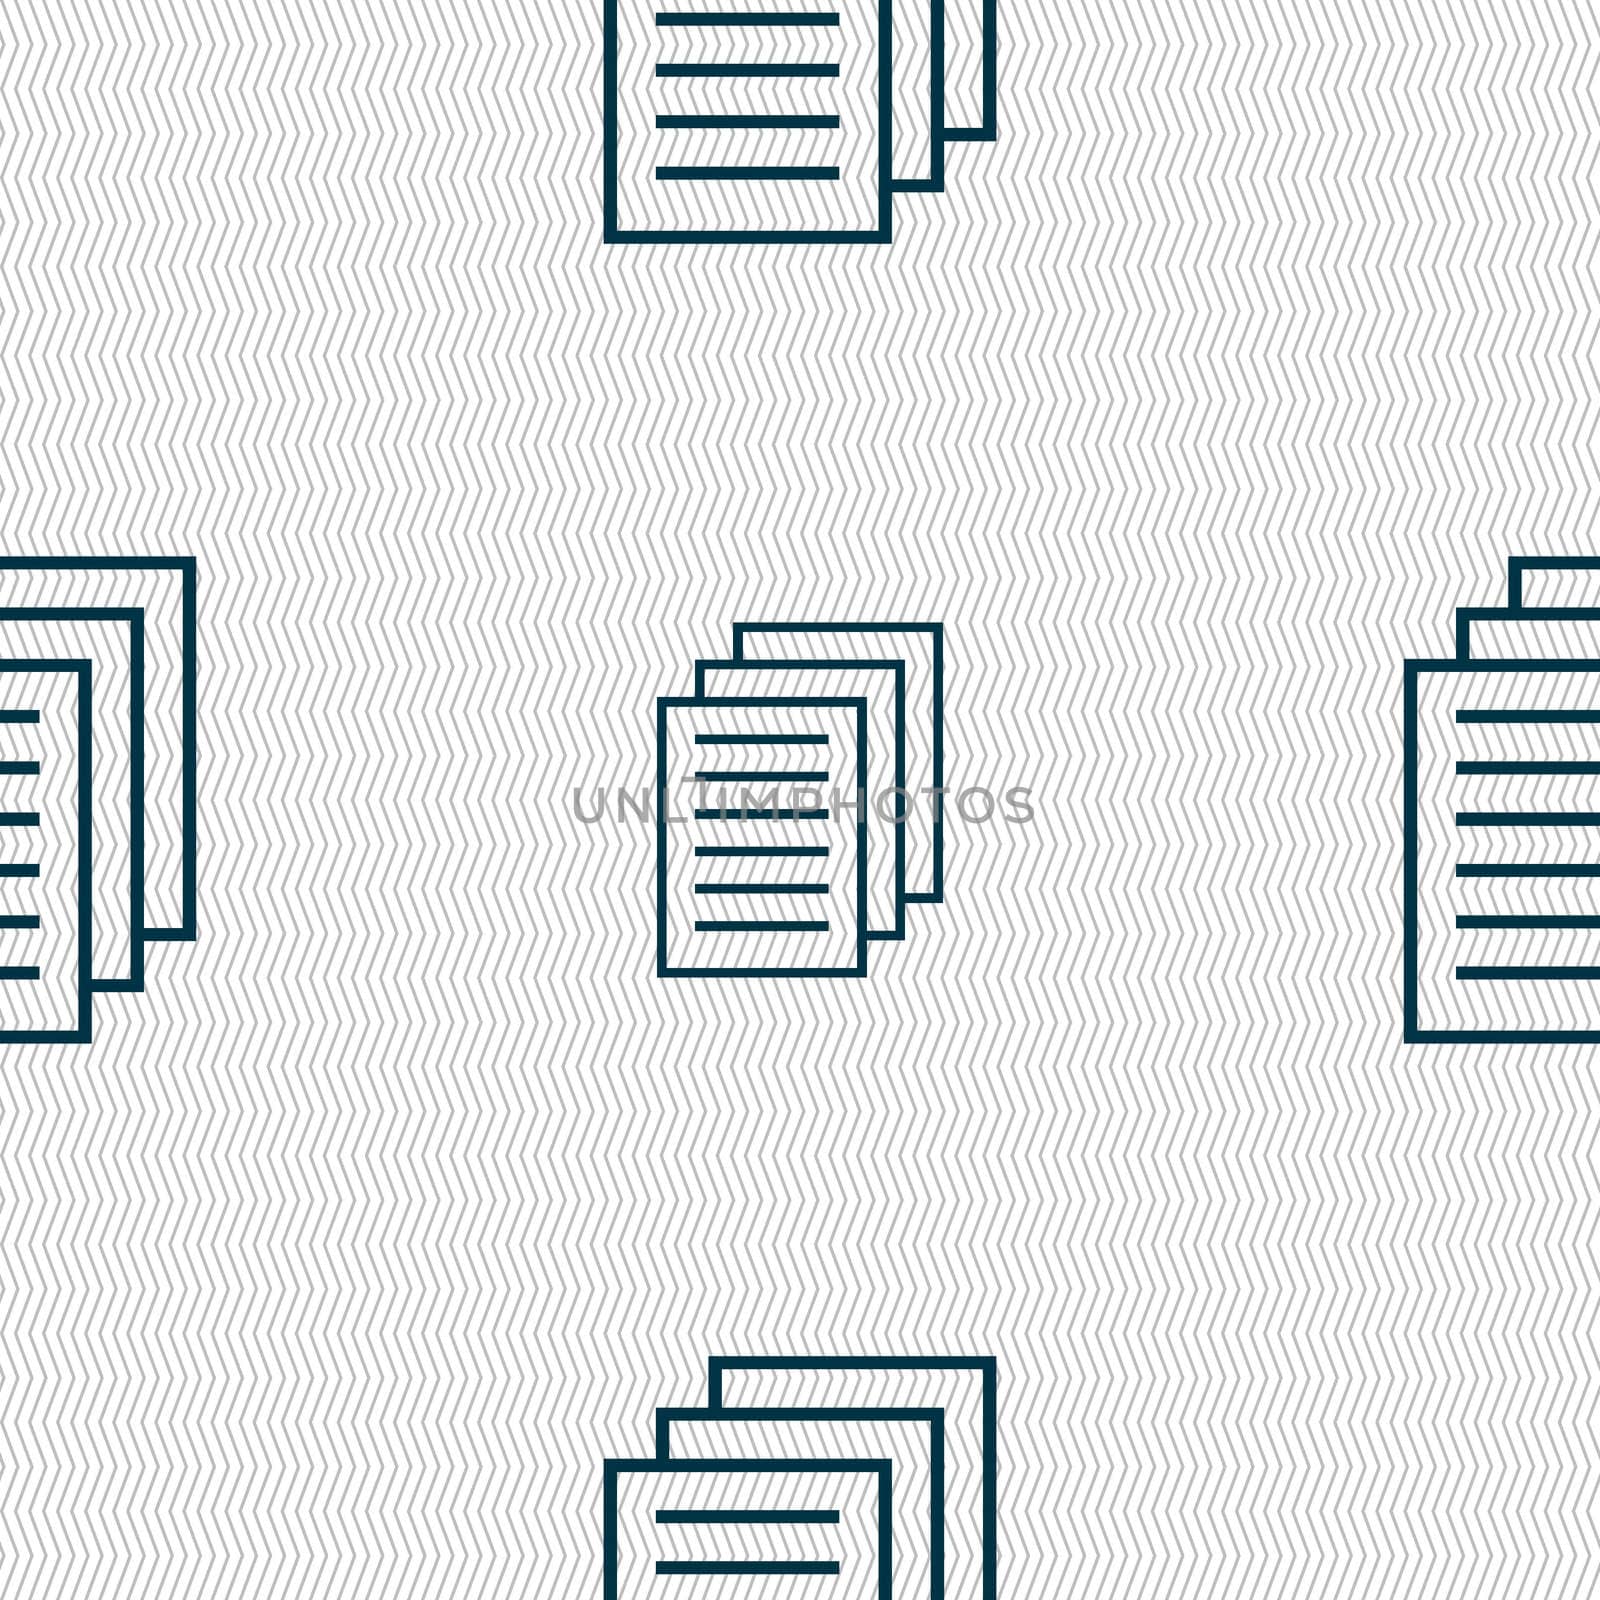 Copy file sign icon. Duplicate document symbol. Seamless abstract background with geometric shapes. illustration